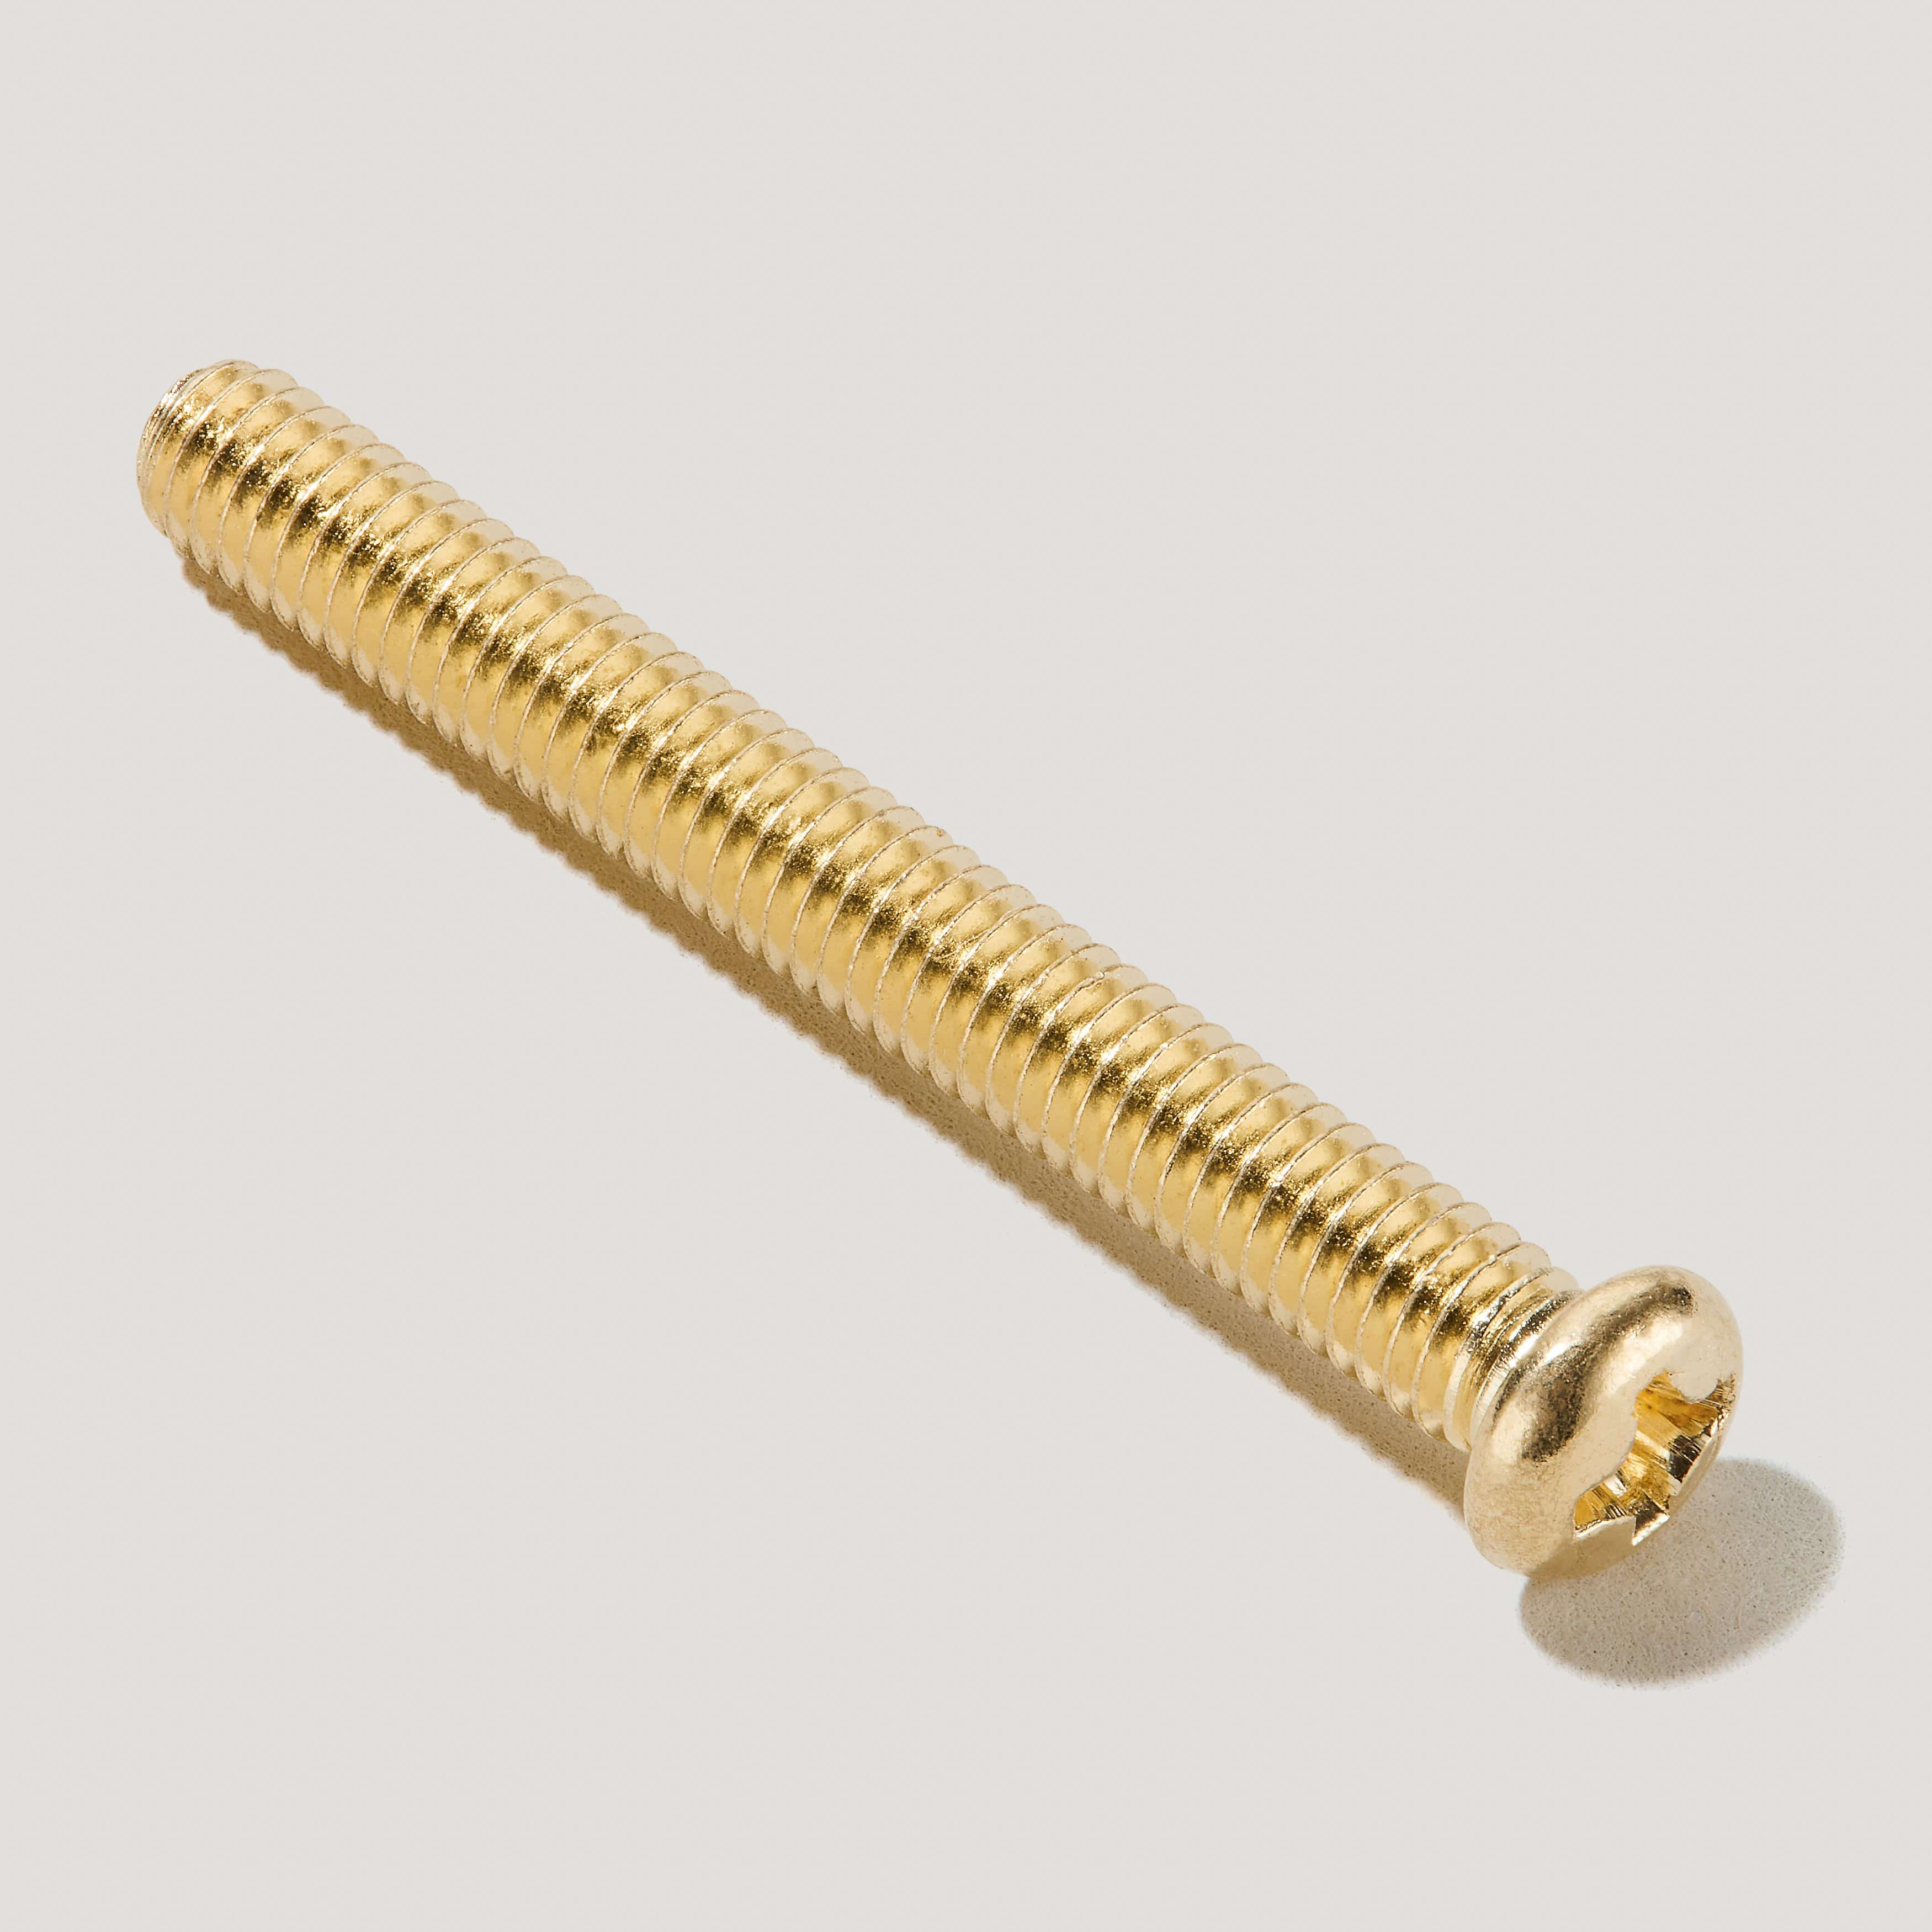 Plank Hardware Screws 30mm Brass M4 Screws - Assorted Lengths Available